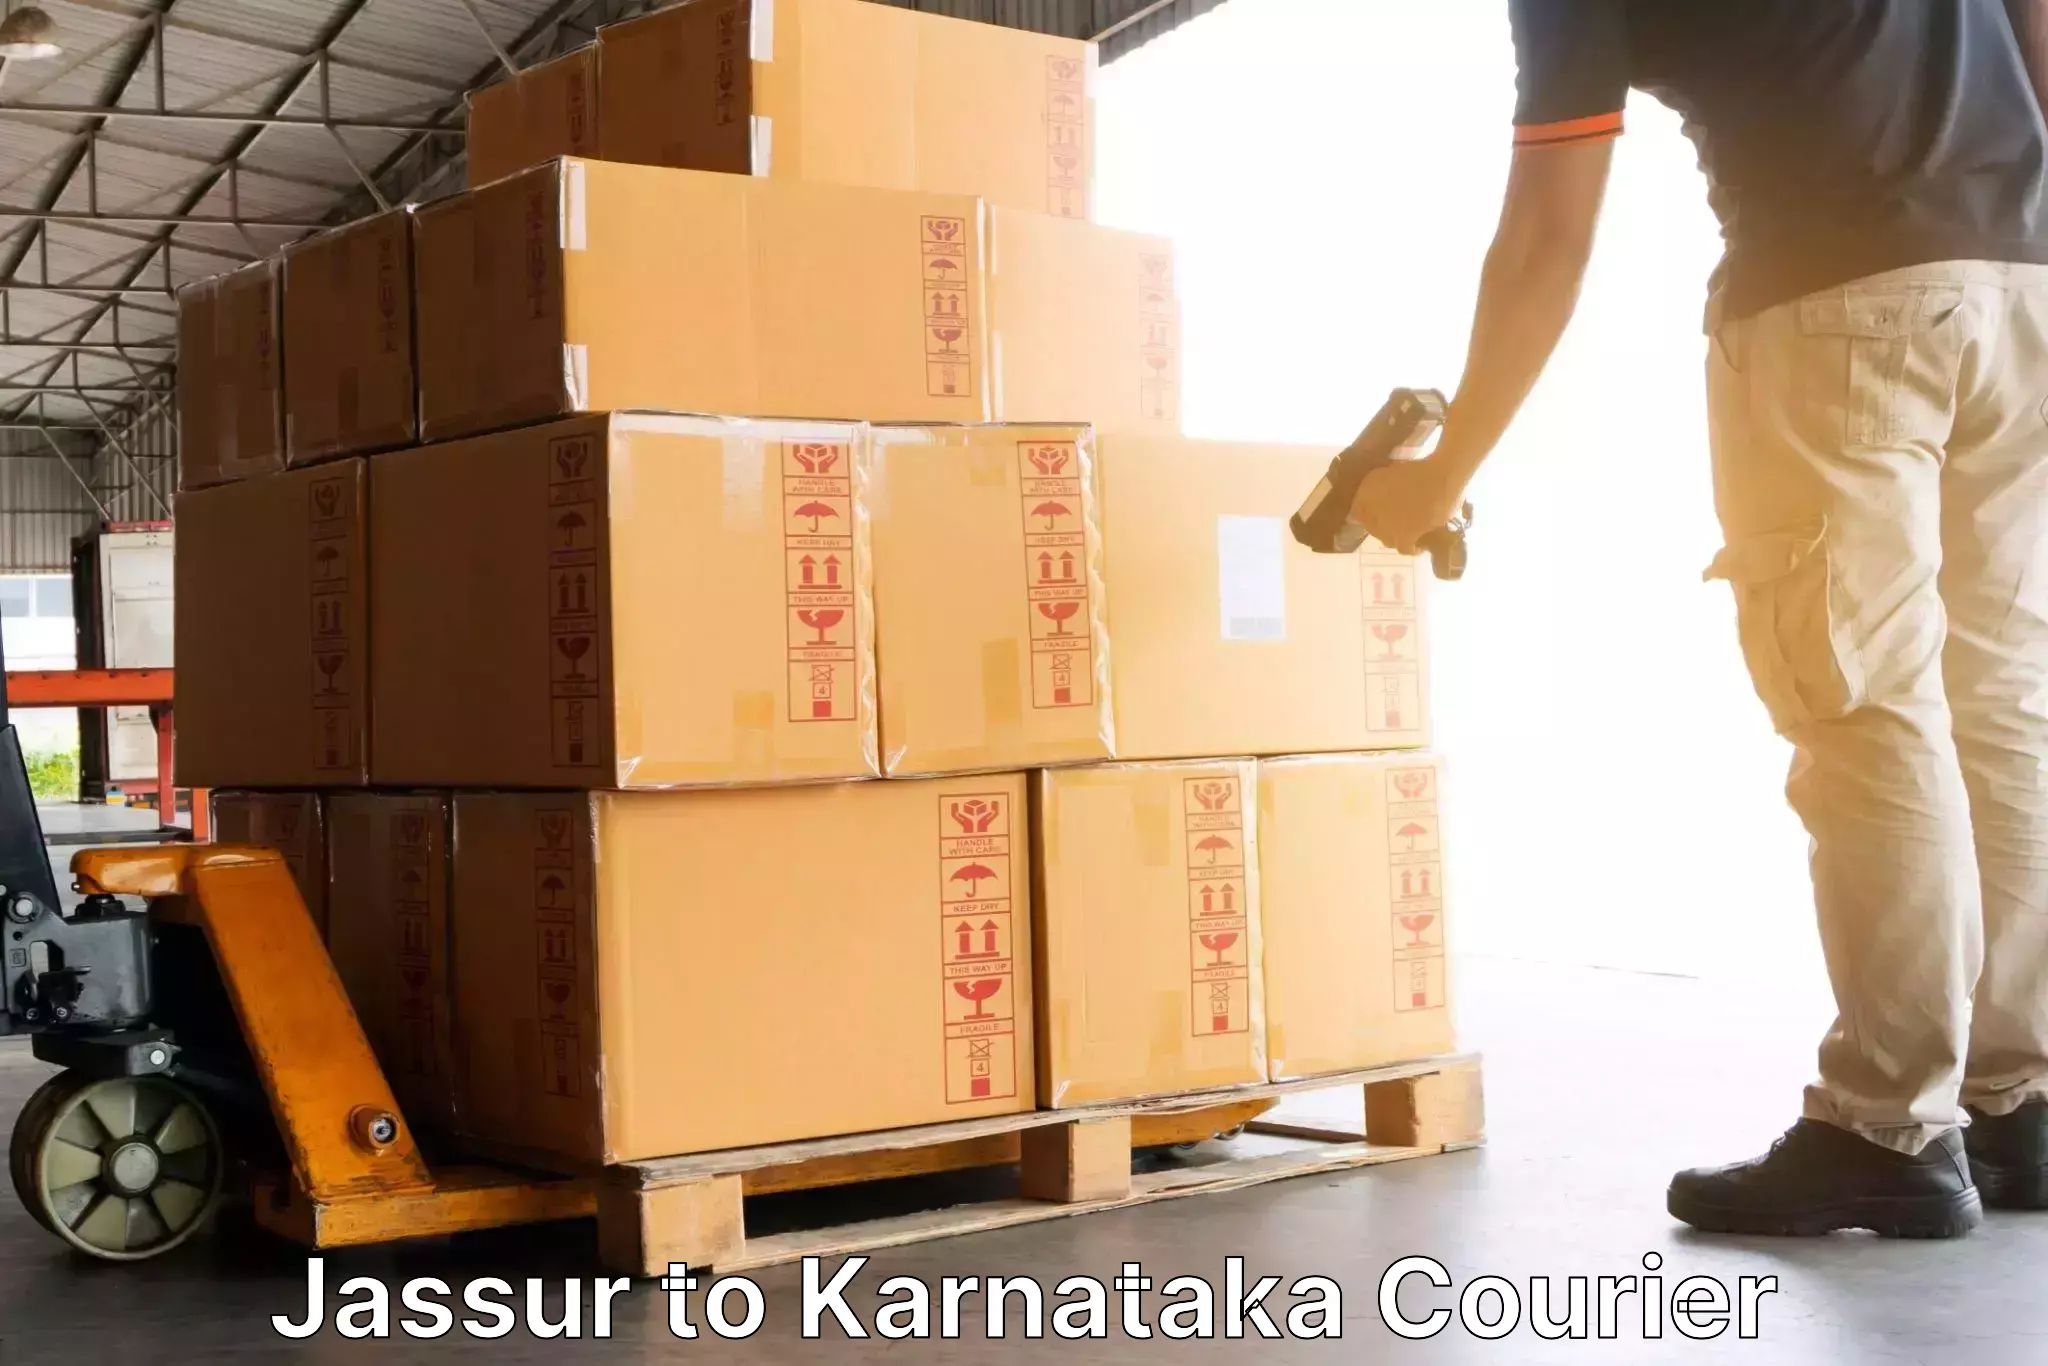 Round-the-clock parcel delivery in Jassur to Yadgiri